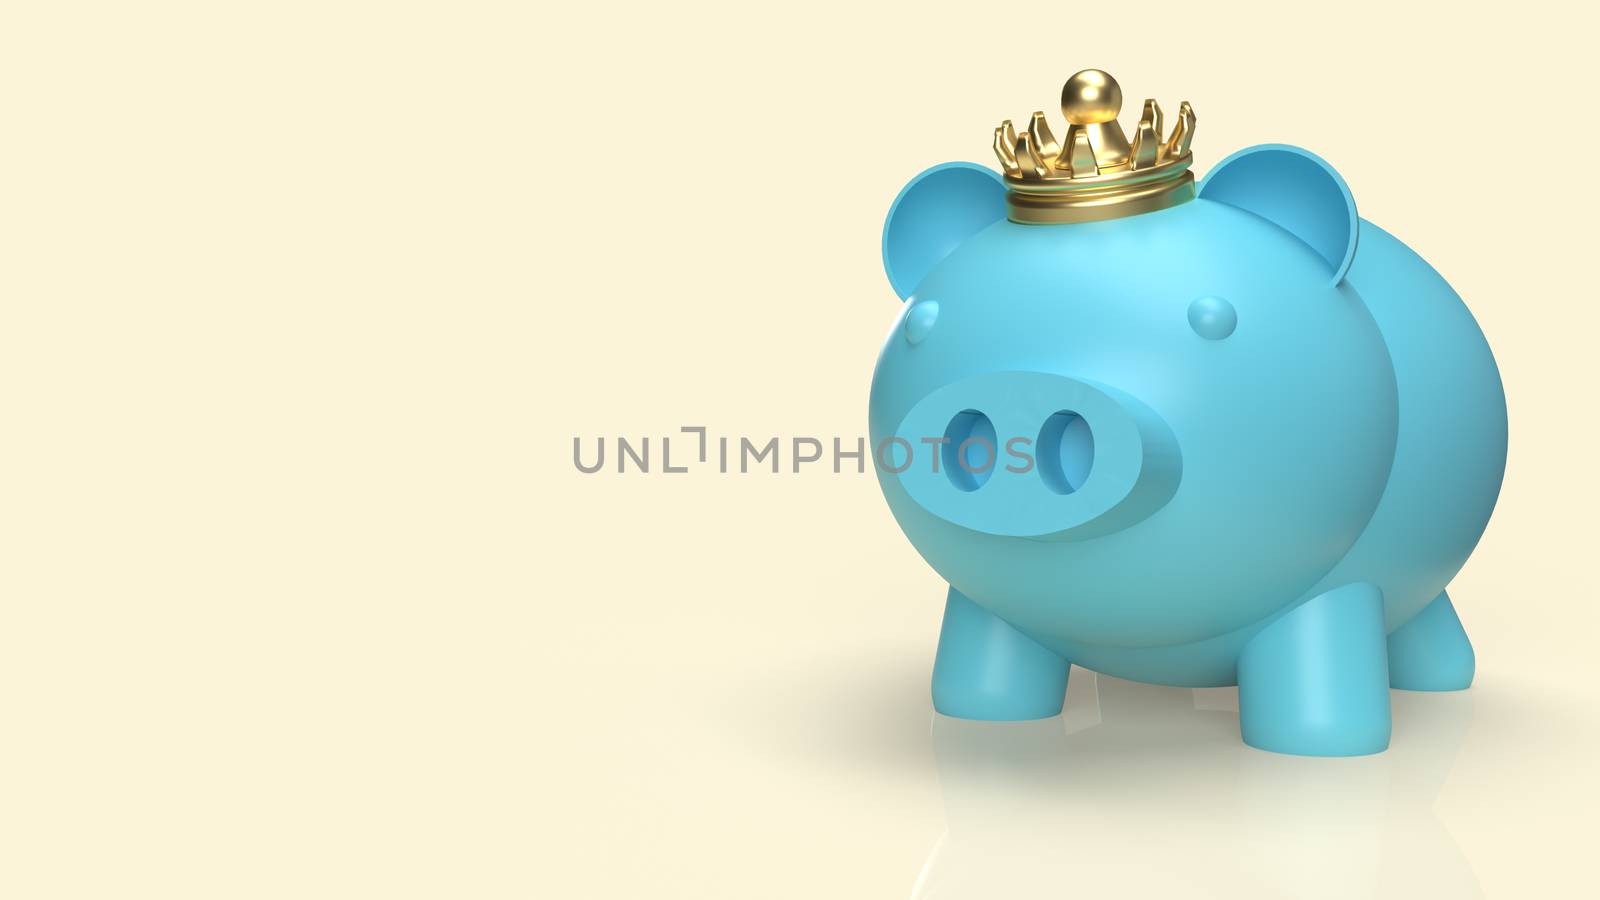 The blue pig bank and crown for business content 3d rendering
 by Niphon_13